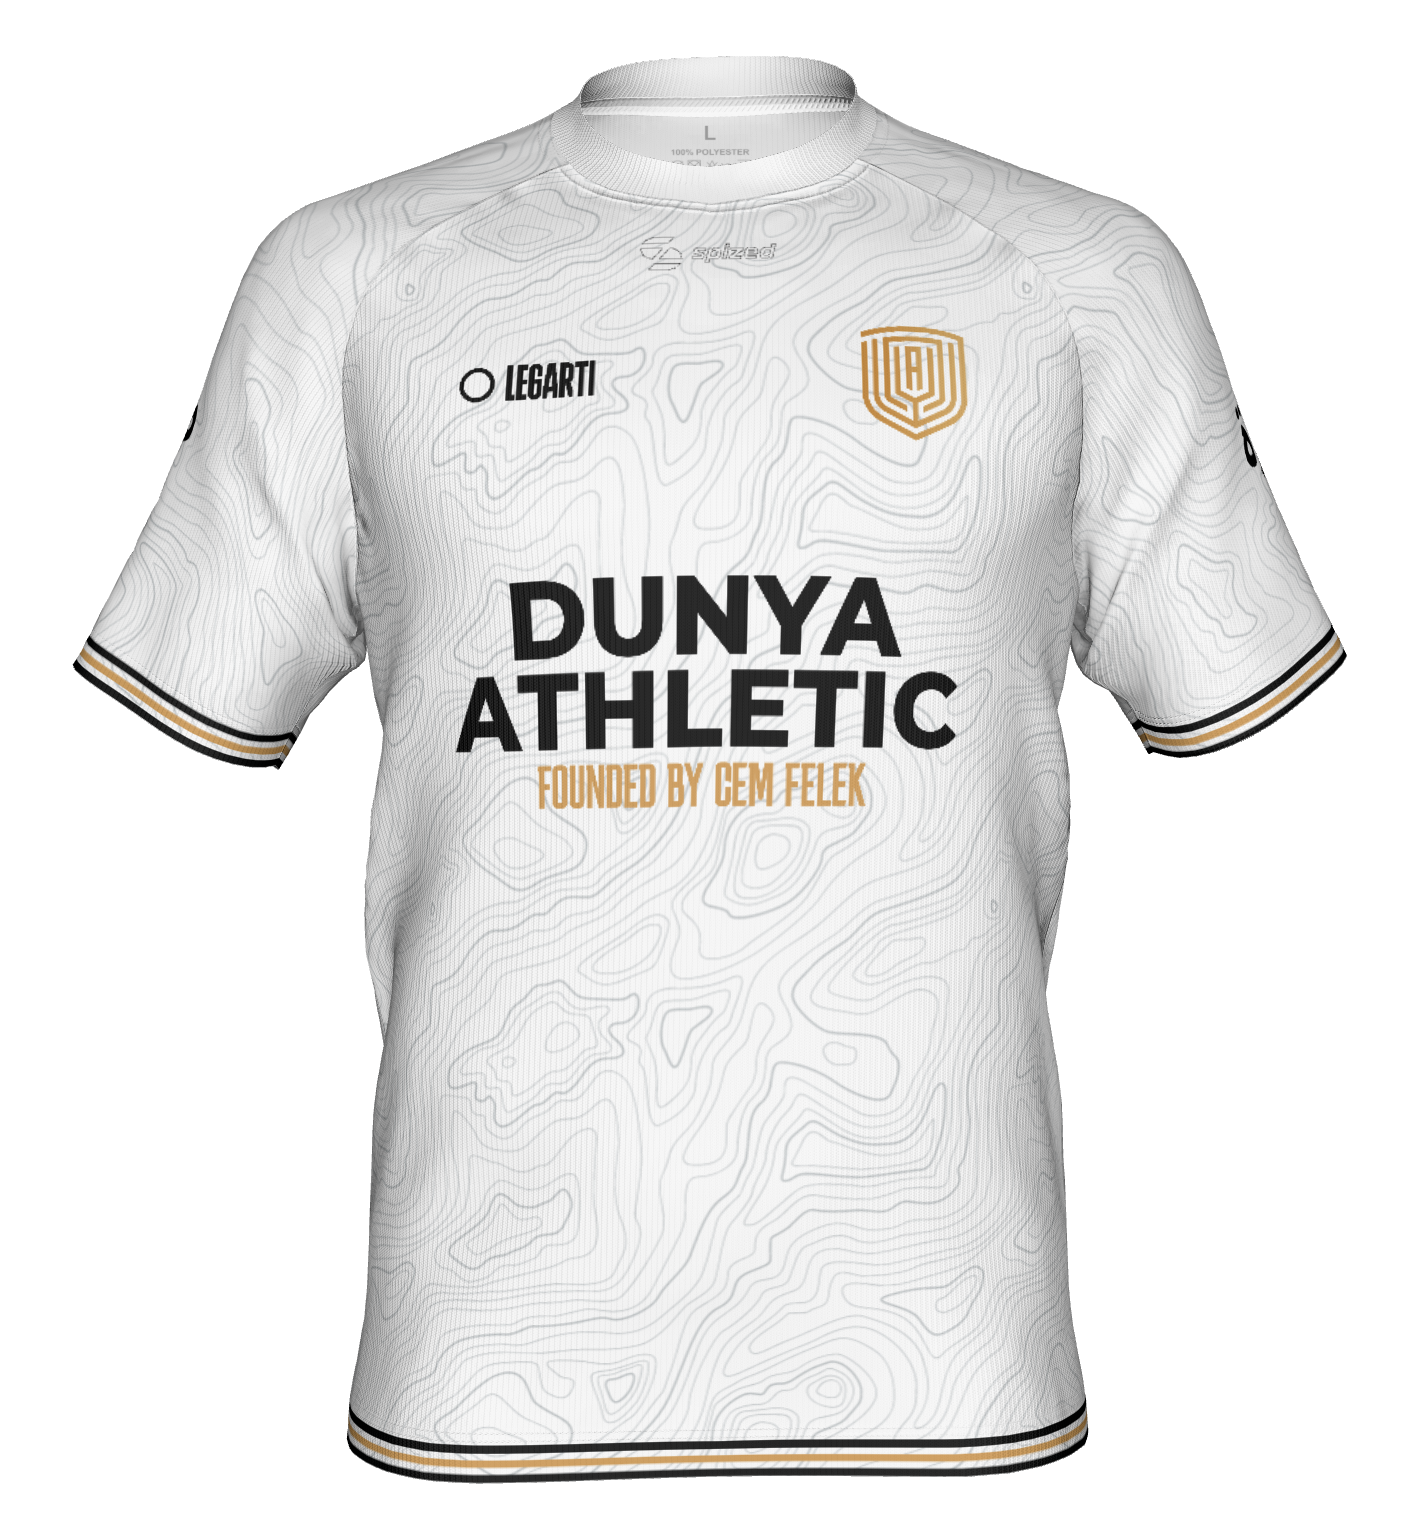 DUNYAATHLETIC - INNER CIRCLE LIMITED EDITION